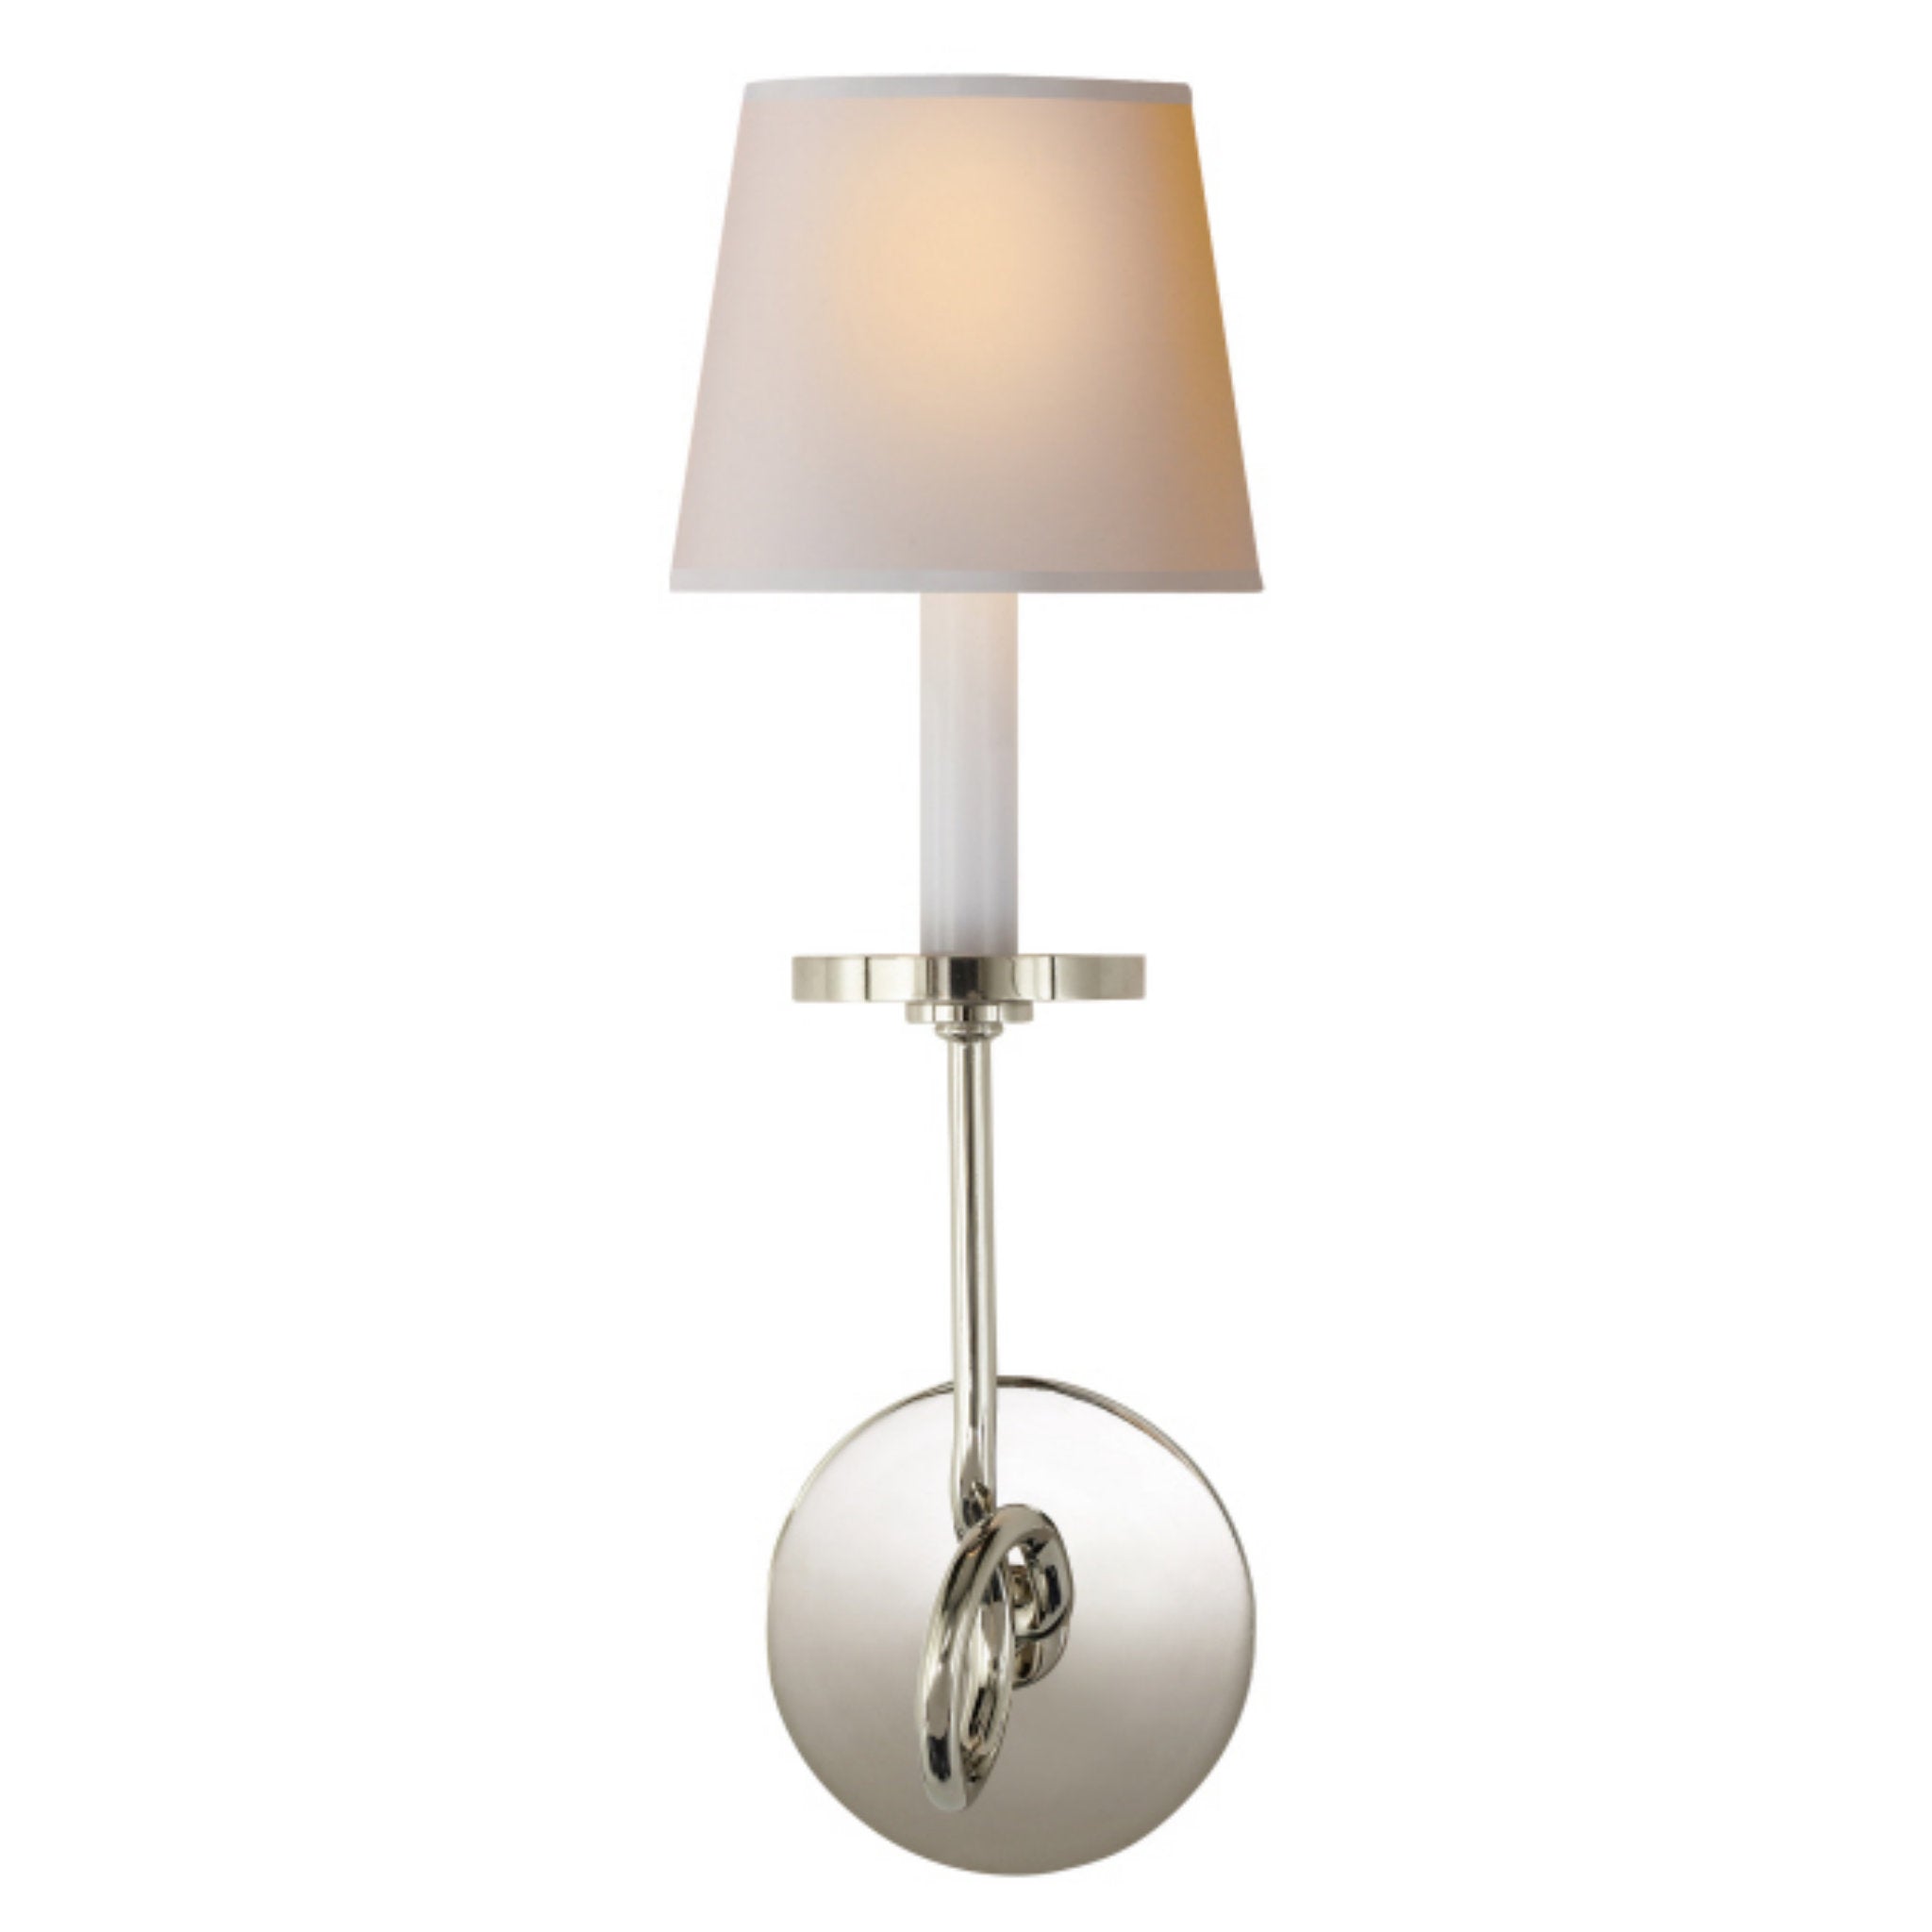 Chapman & Myers Symmetric Twist Single Sconce in Polished Nickel with Natural Paper Shade